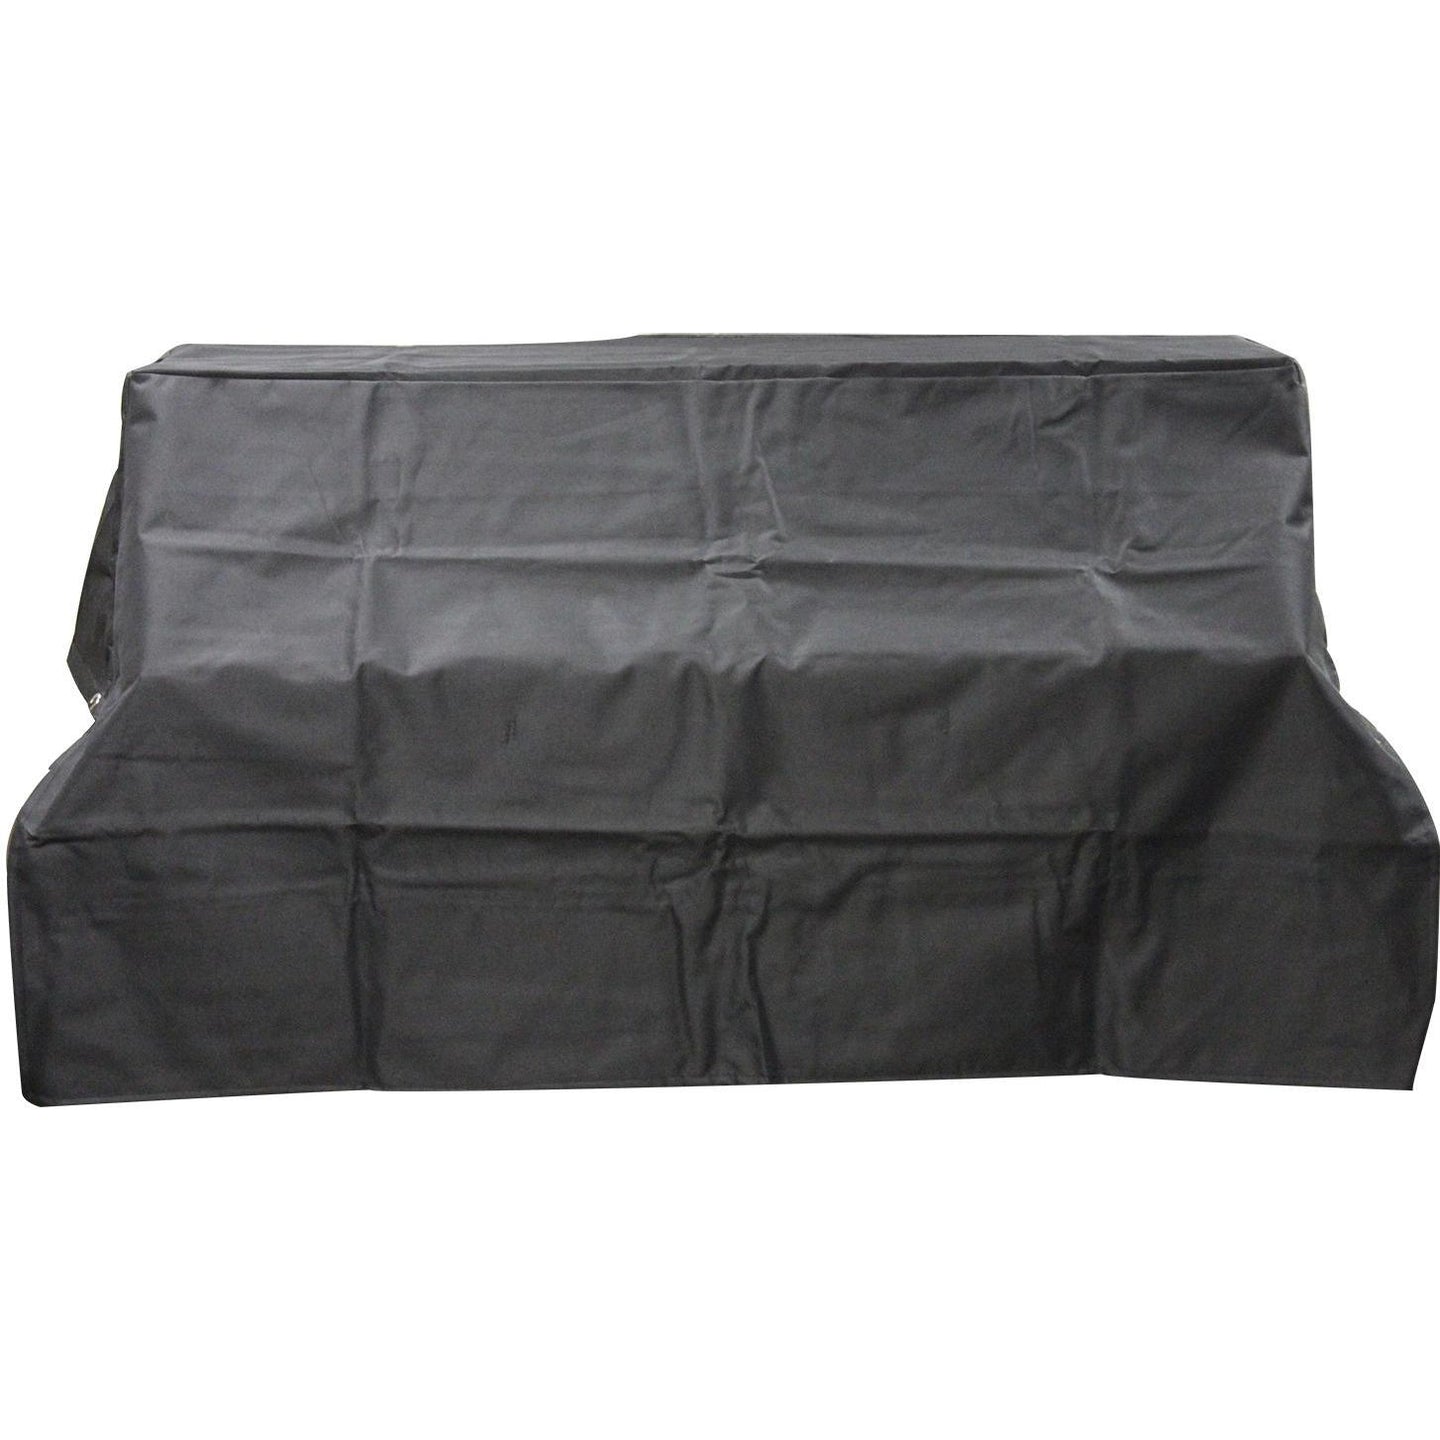 Summerset Deluxe Grill Cover For 36-Inch Alturi Built-In Gas Grills